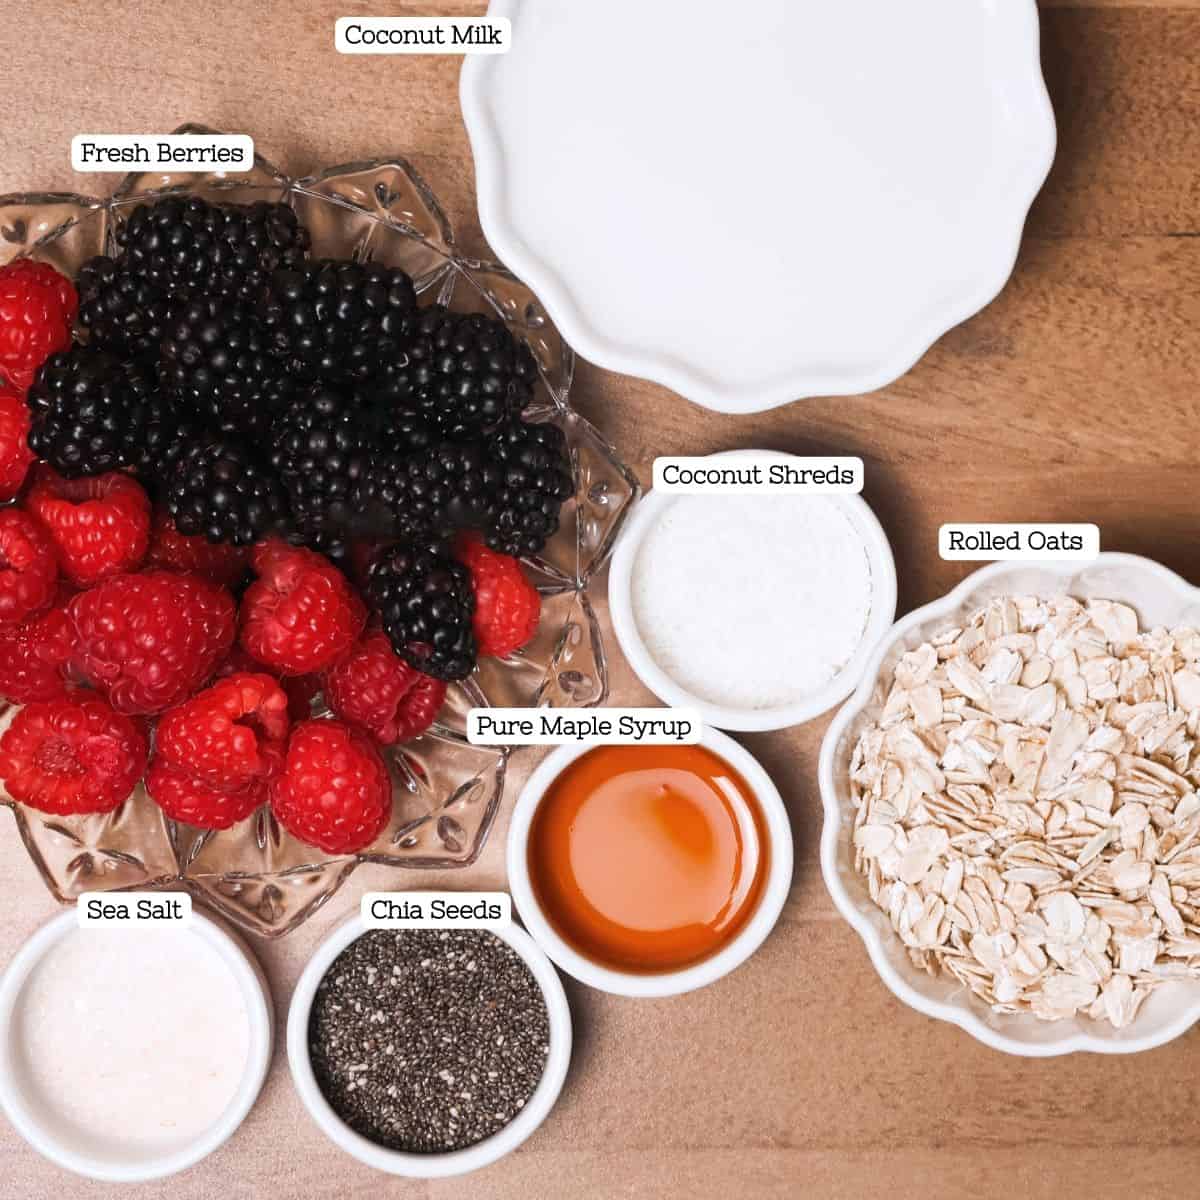 Ingredients for overnight oats arranged on a brown surface, including bowls of fresh blackberries, raspberries, coconut shreds, rolled oats, pure maple syrup, sea salt, and chia seeds next to a jug of coconut milk.